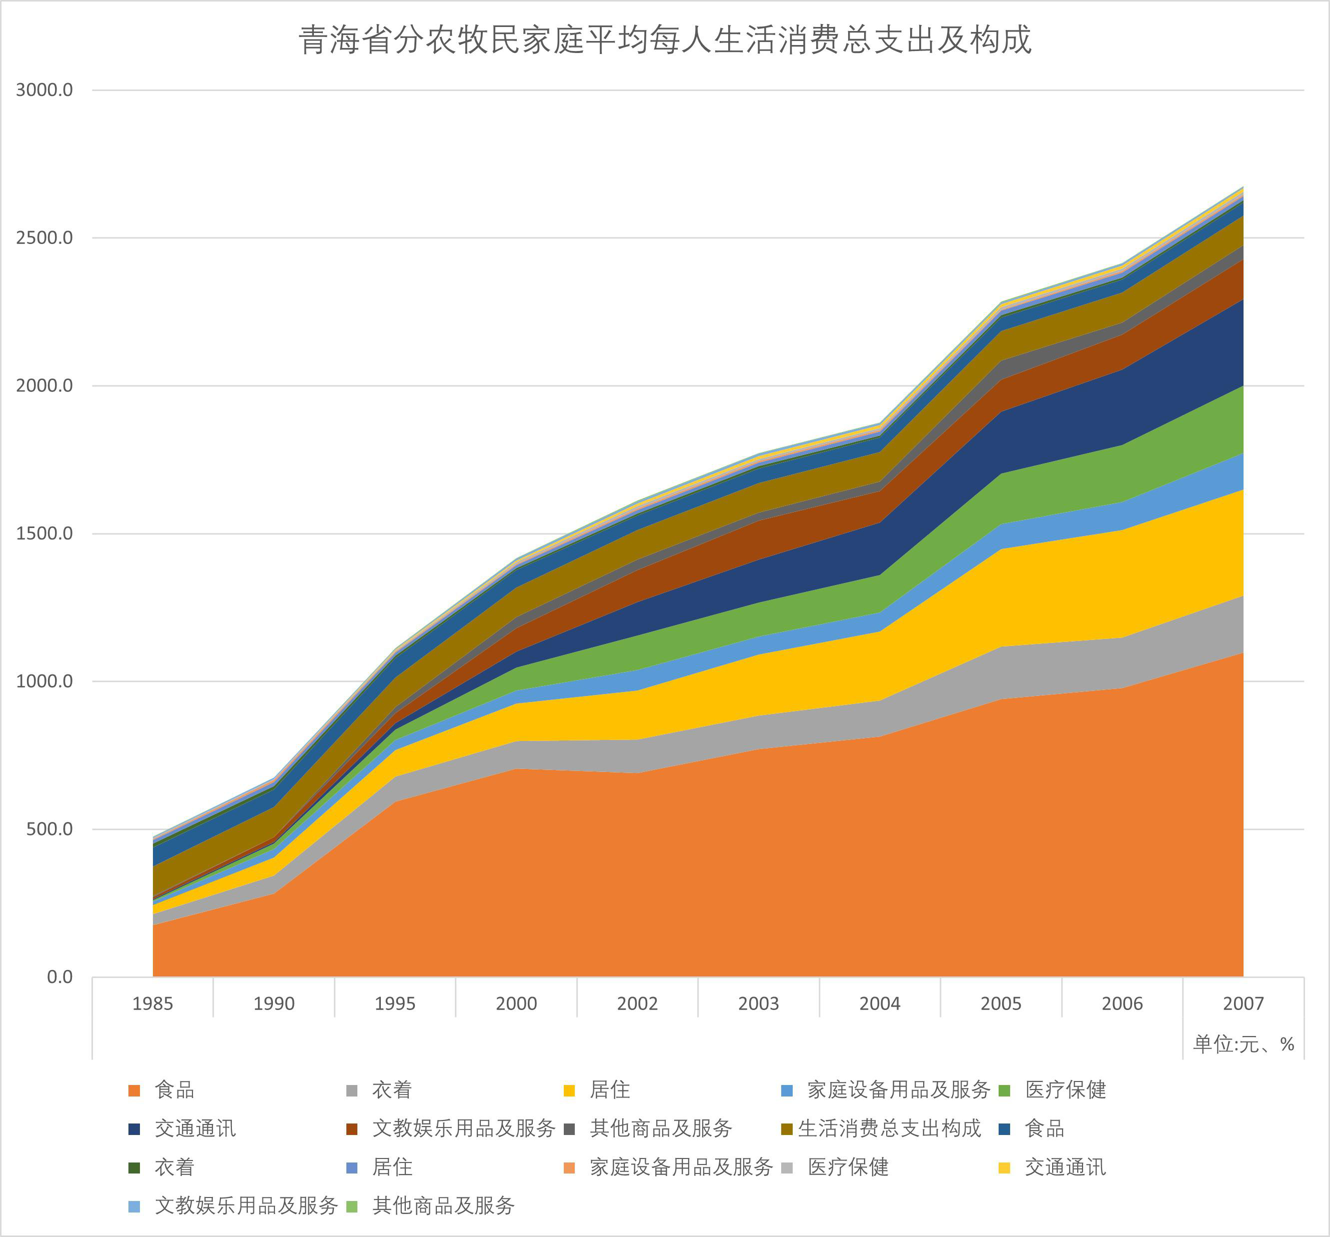 Total expenditure and composition of average per capita living consumption of farmers and herdsmen in Qinghai Province (1985-2007)